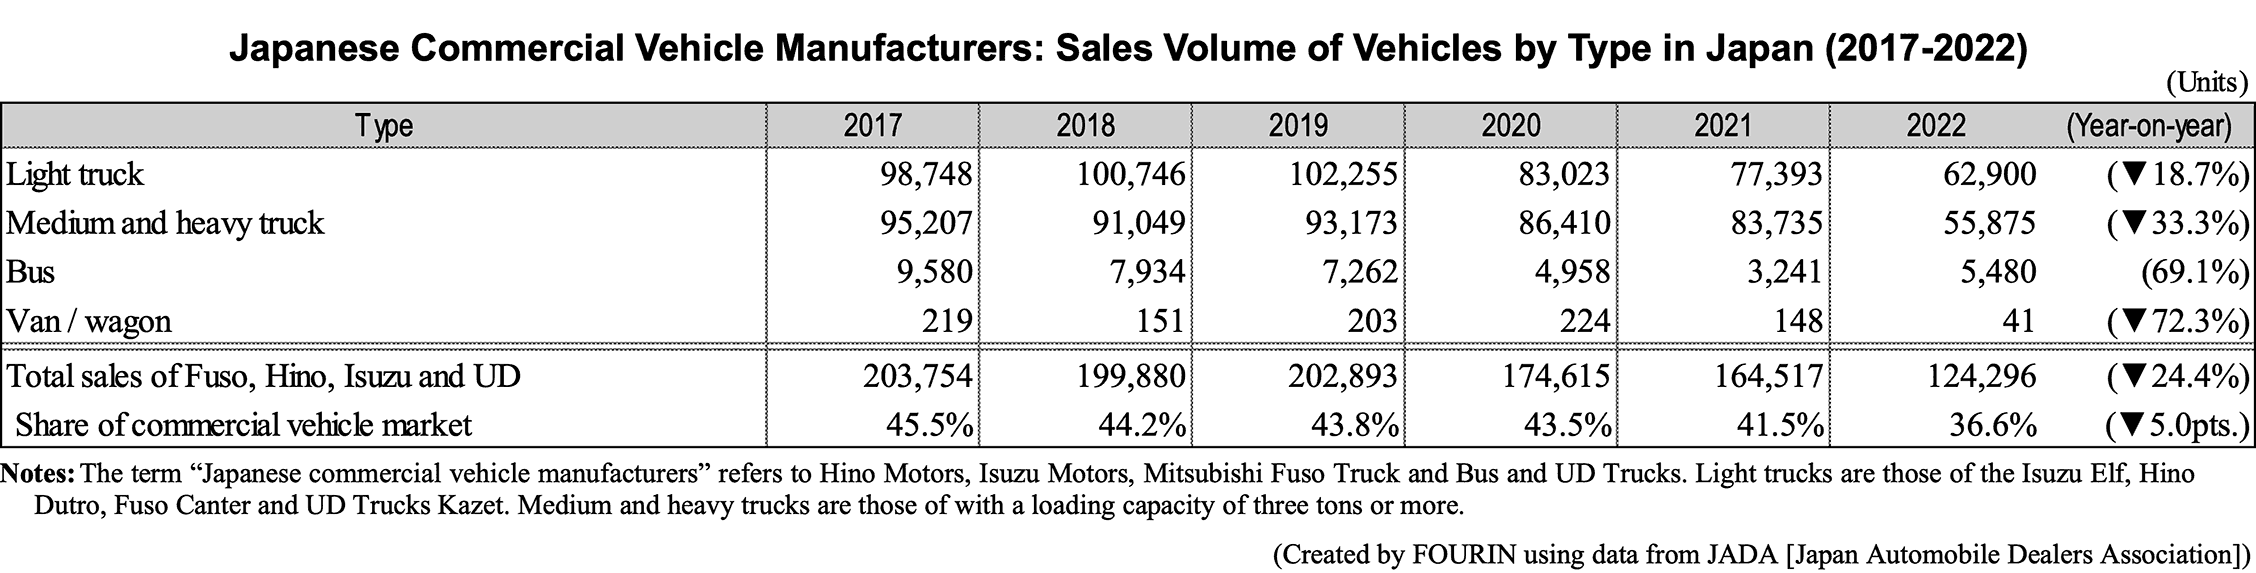 Japanese Commercial Vehicle Manufacturers: Sales Volume of Vehicles by Type in Japan (2017-2022)